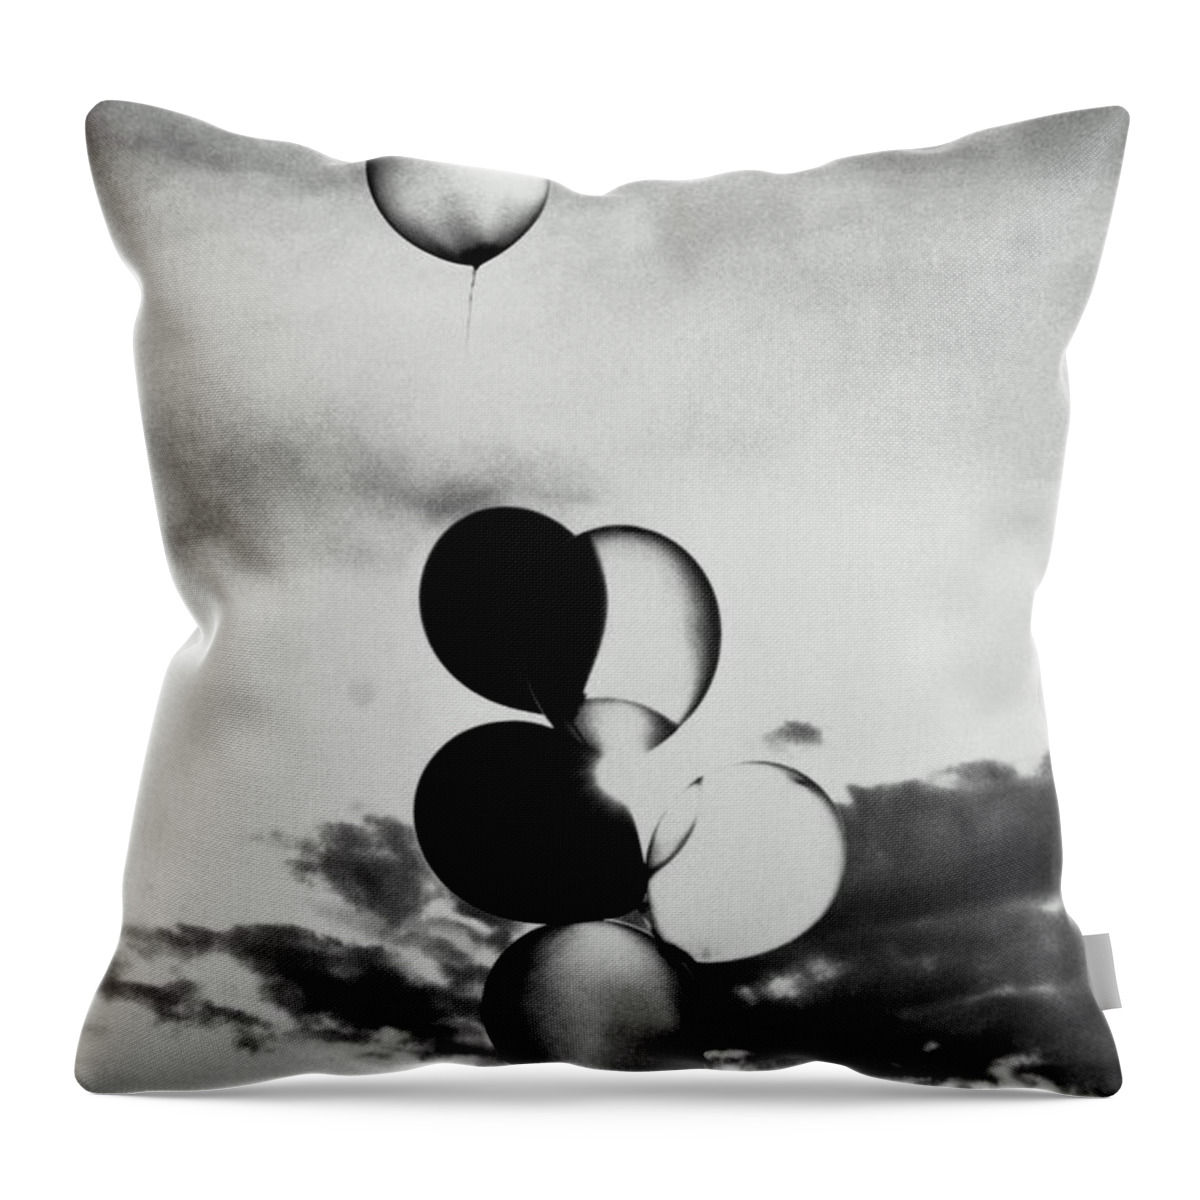 Mid-air Throw Pillow featuring the photograph Bunch Of Balloons In Sky, One Floating by Ross Anania